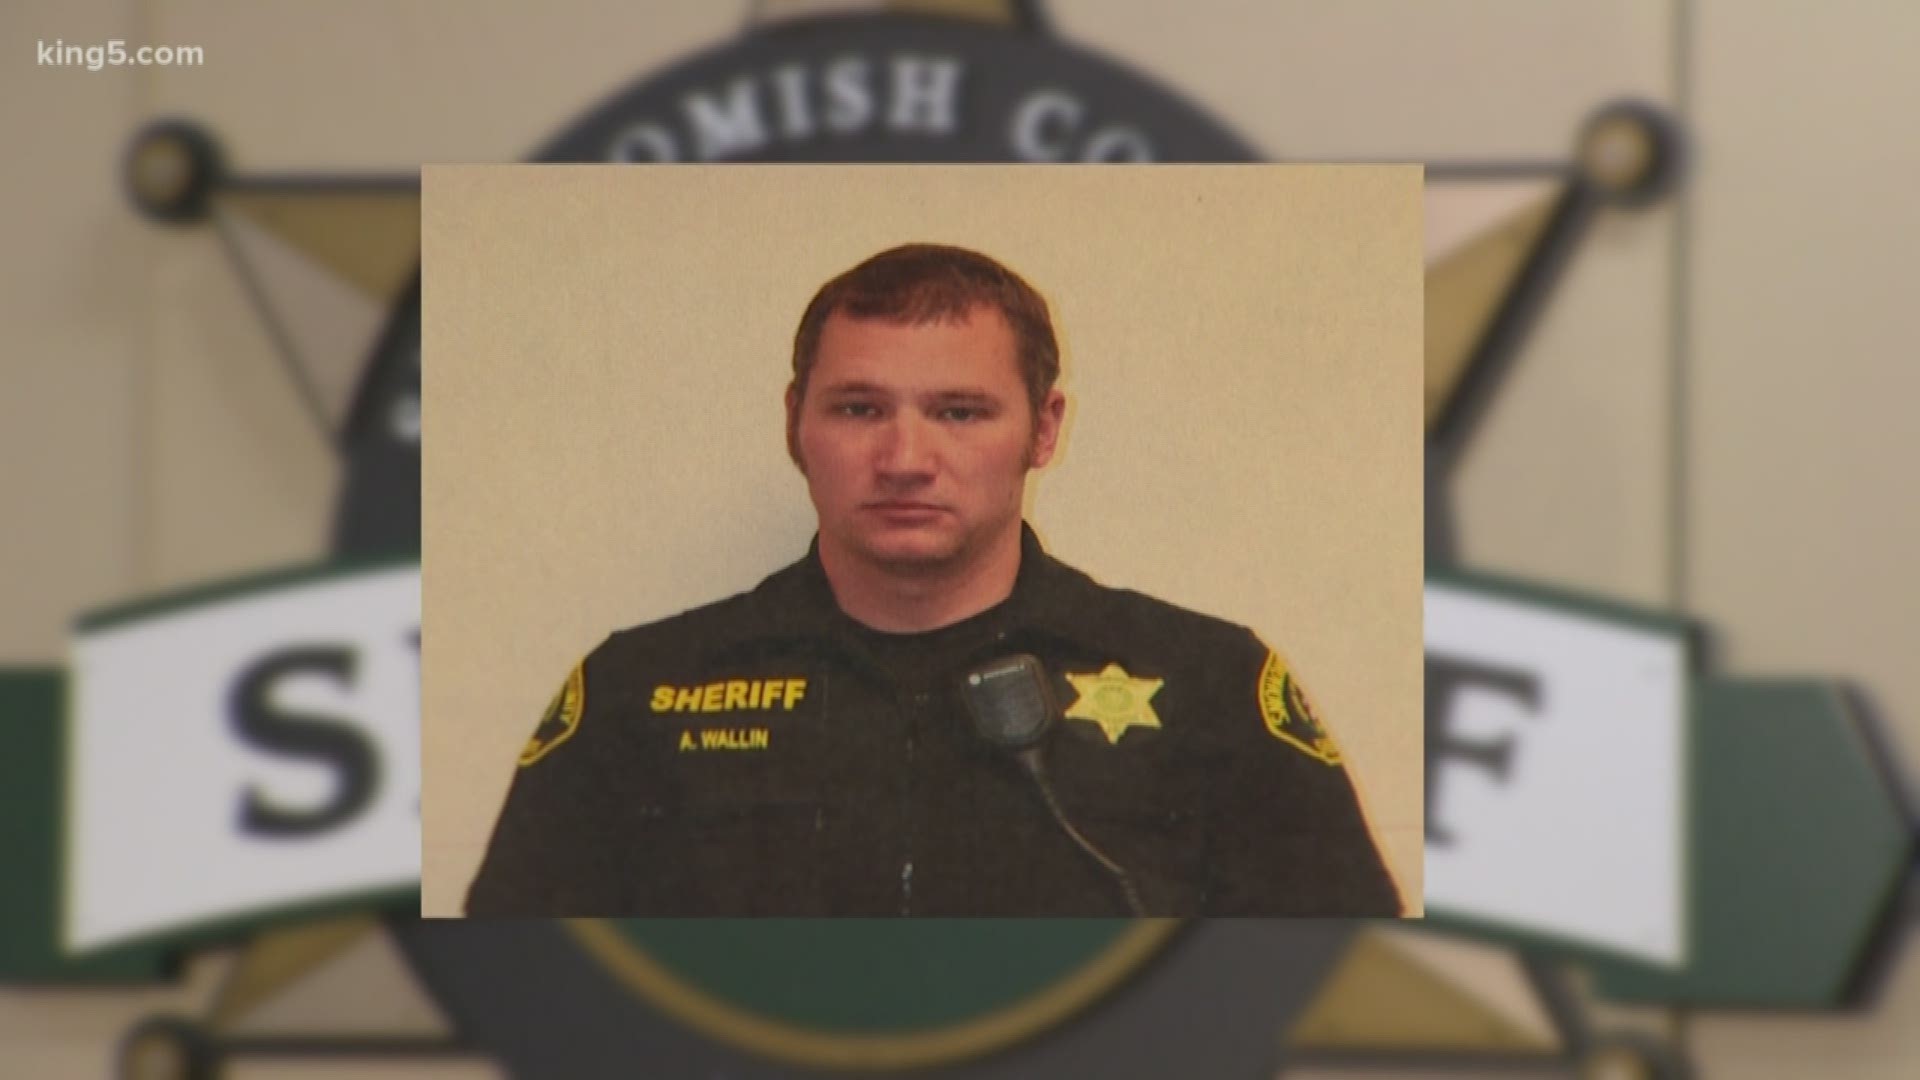 The new Snohomish County Sheriff re-instated a deputy involved in a chase and then deadly shooting